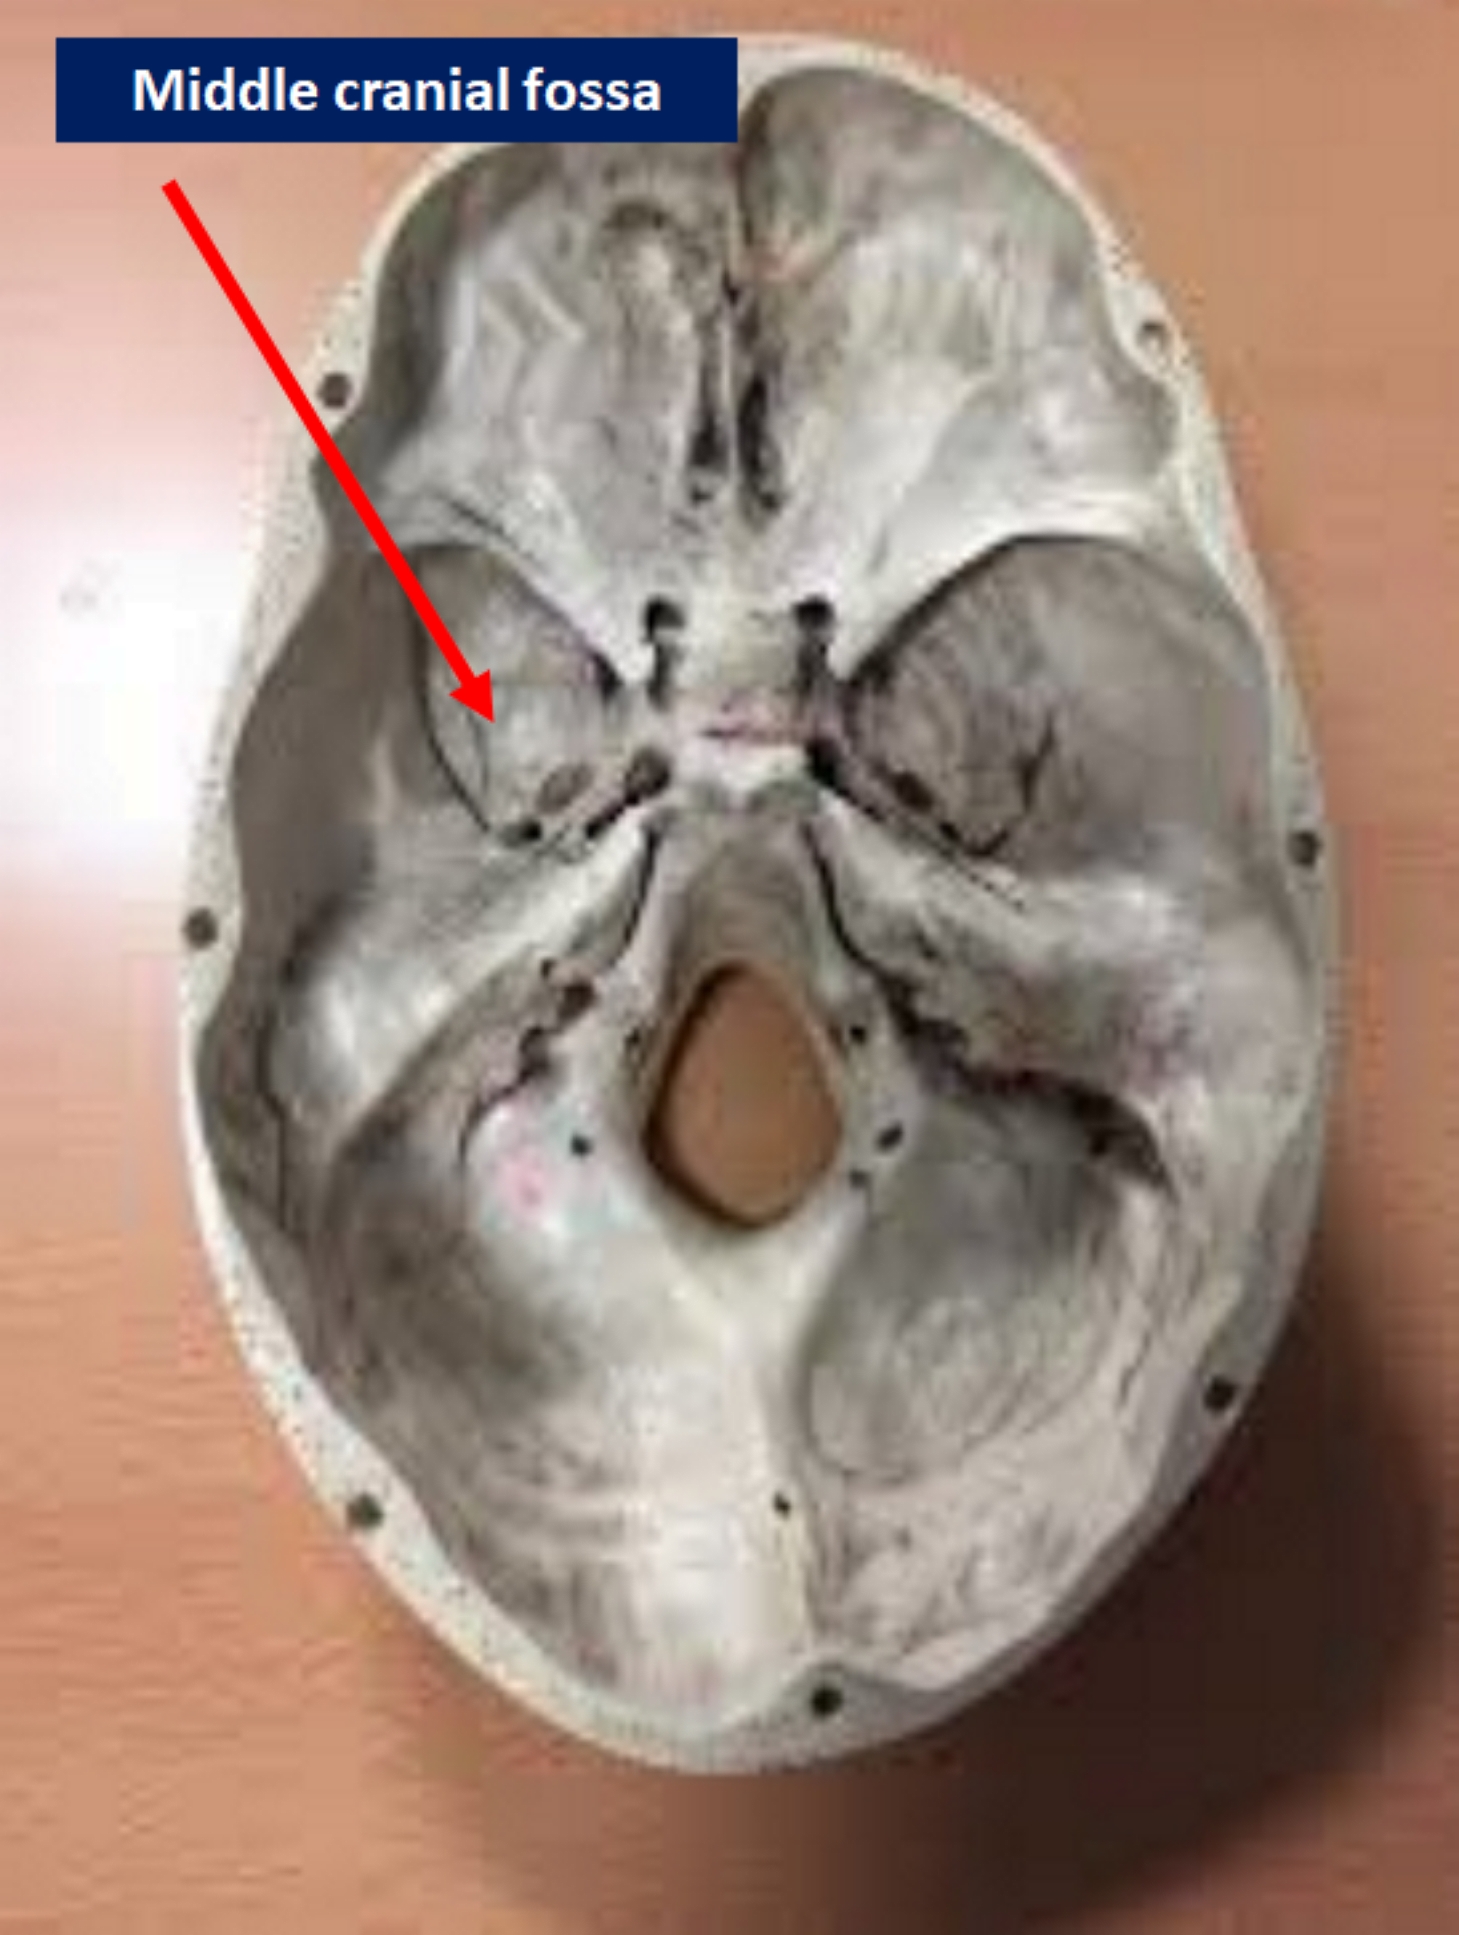 Anatomy, Head and Neck, Middle Cranial Fossa Article - StatPearls